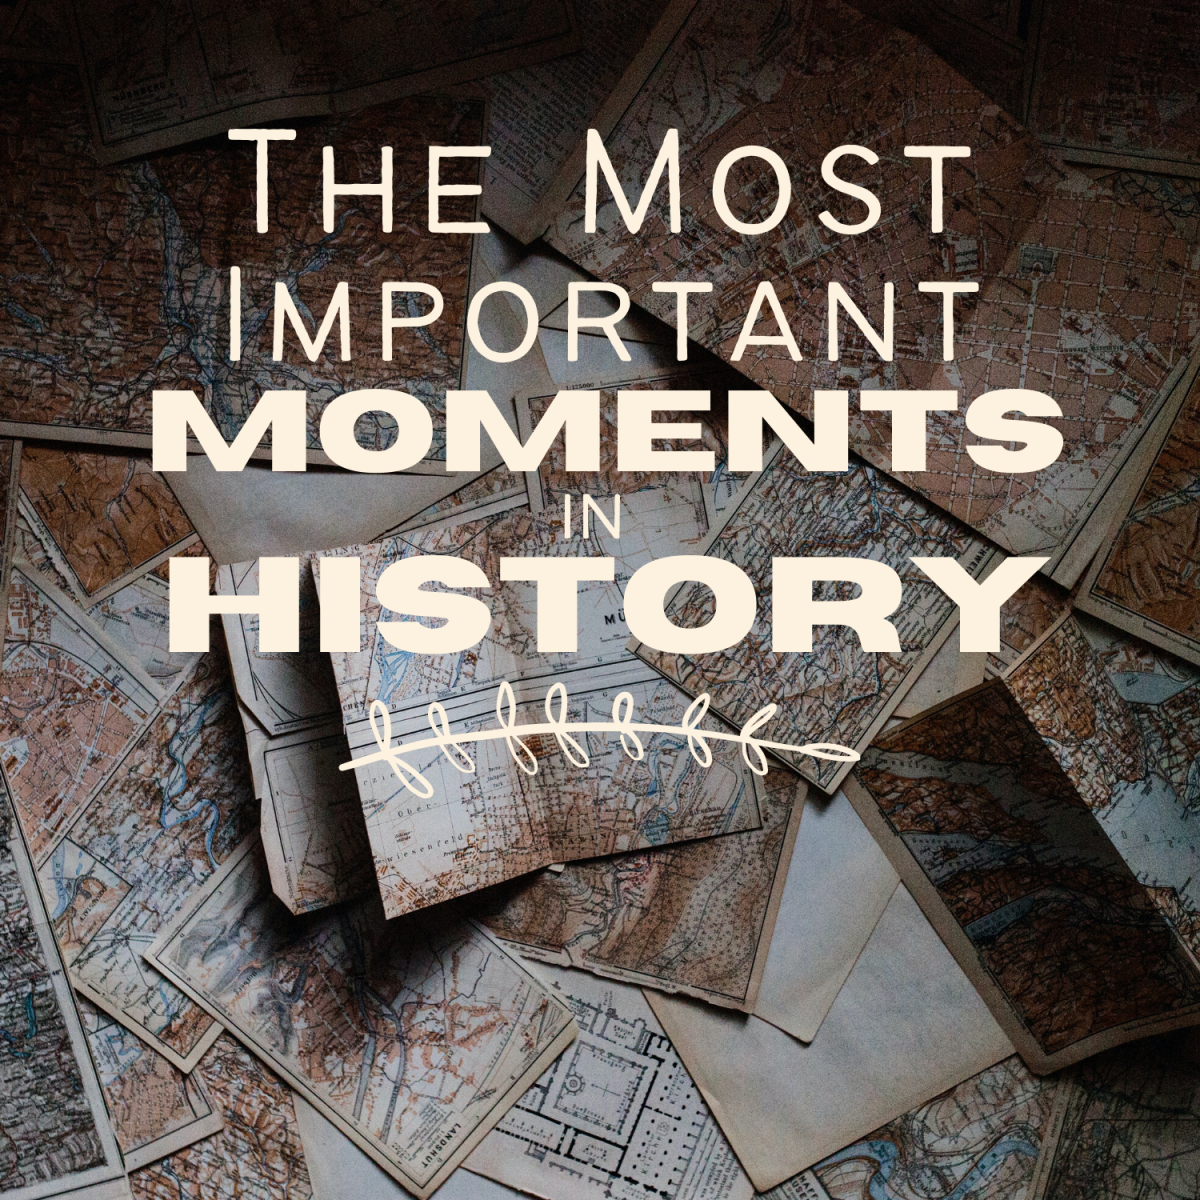 The 10 Most Important Moments in History